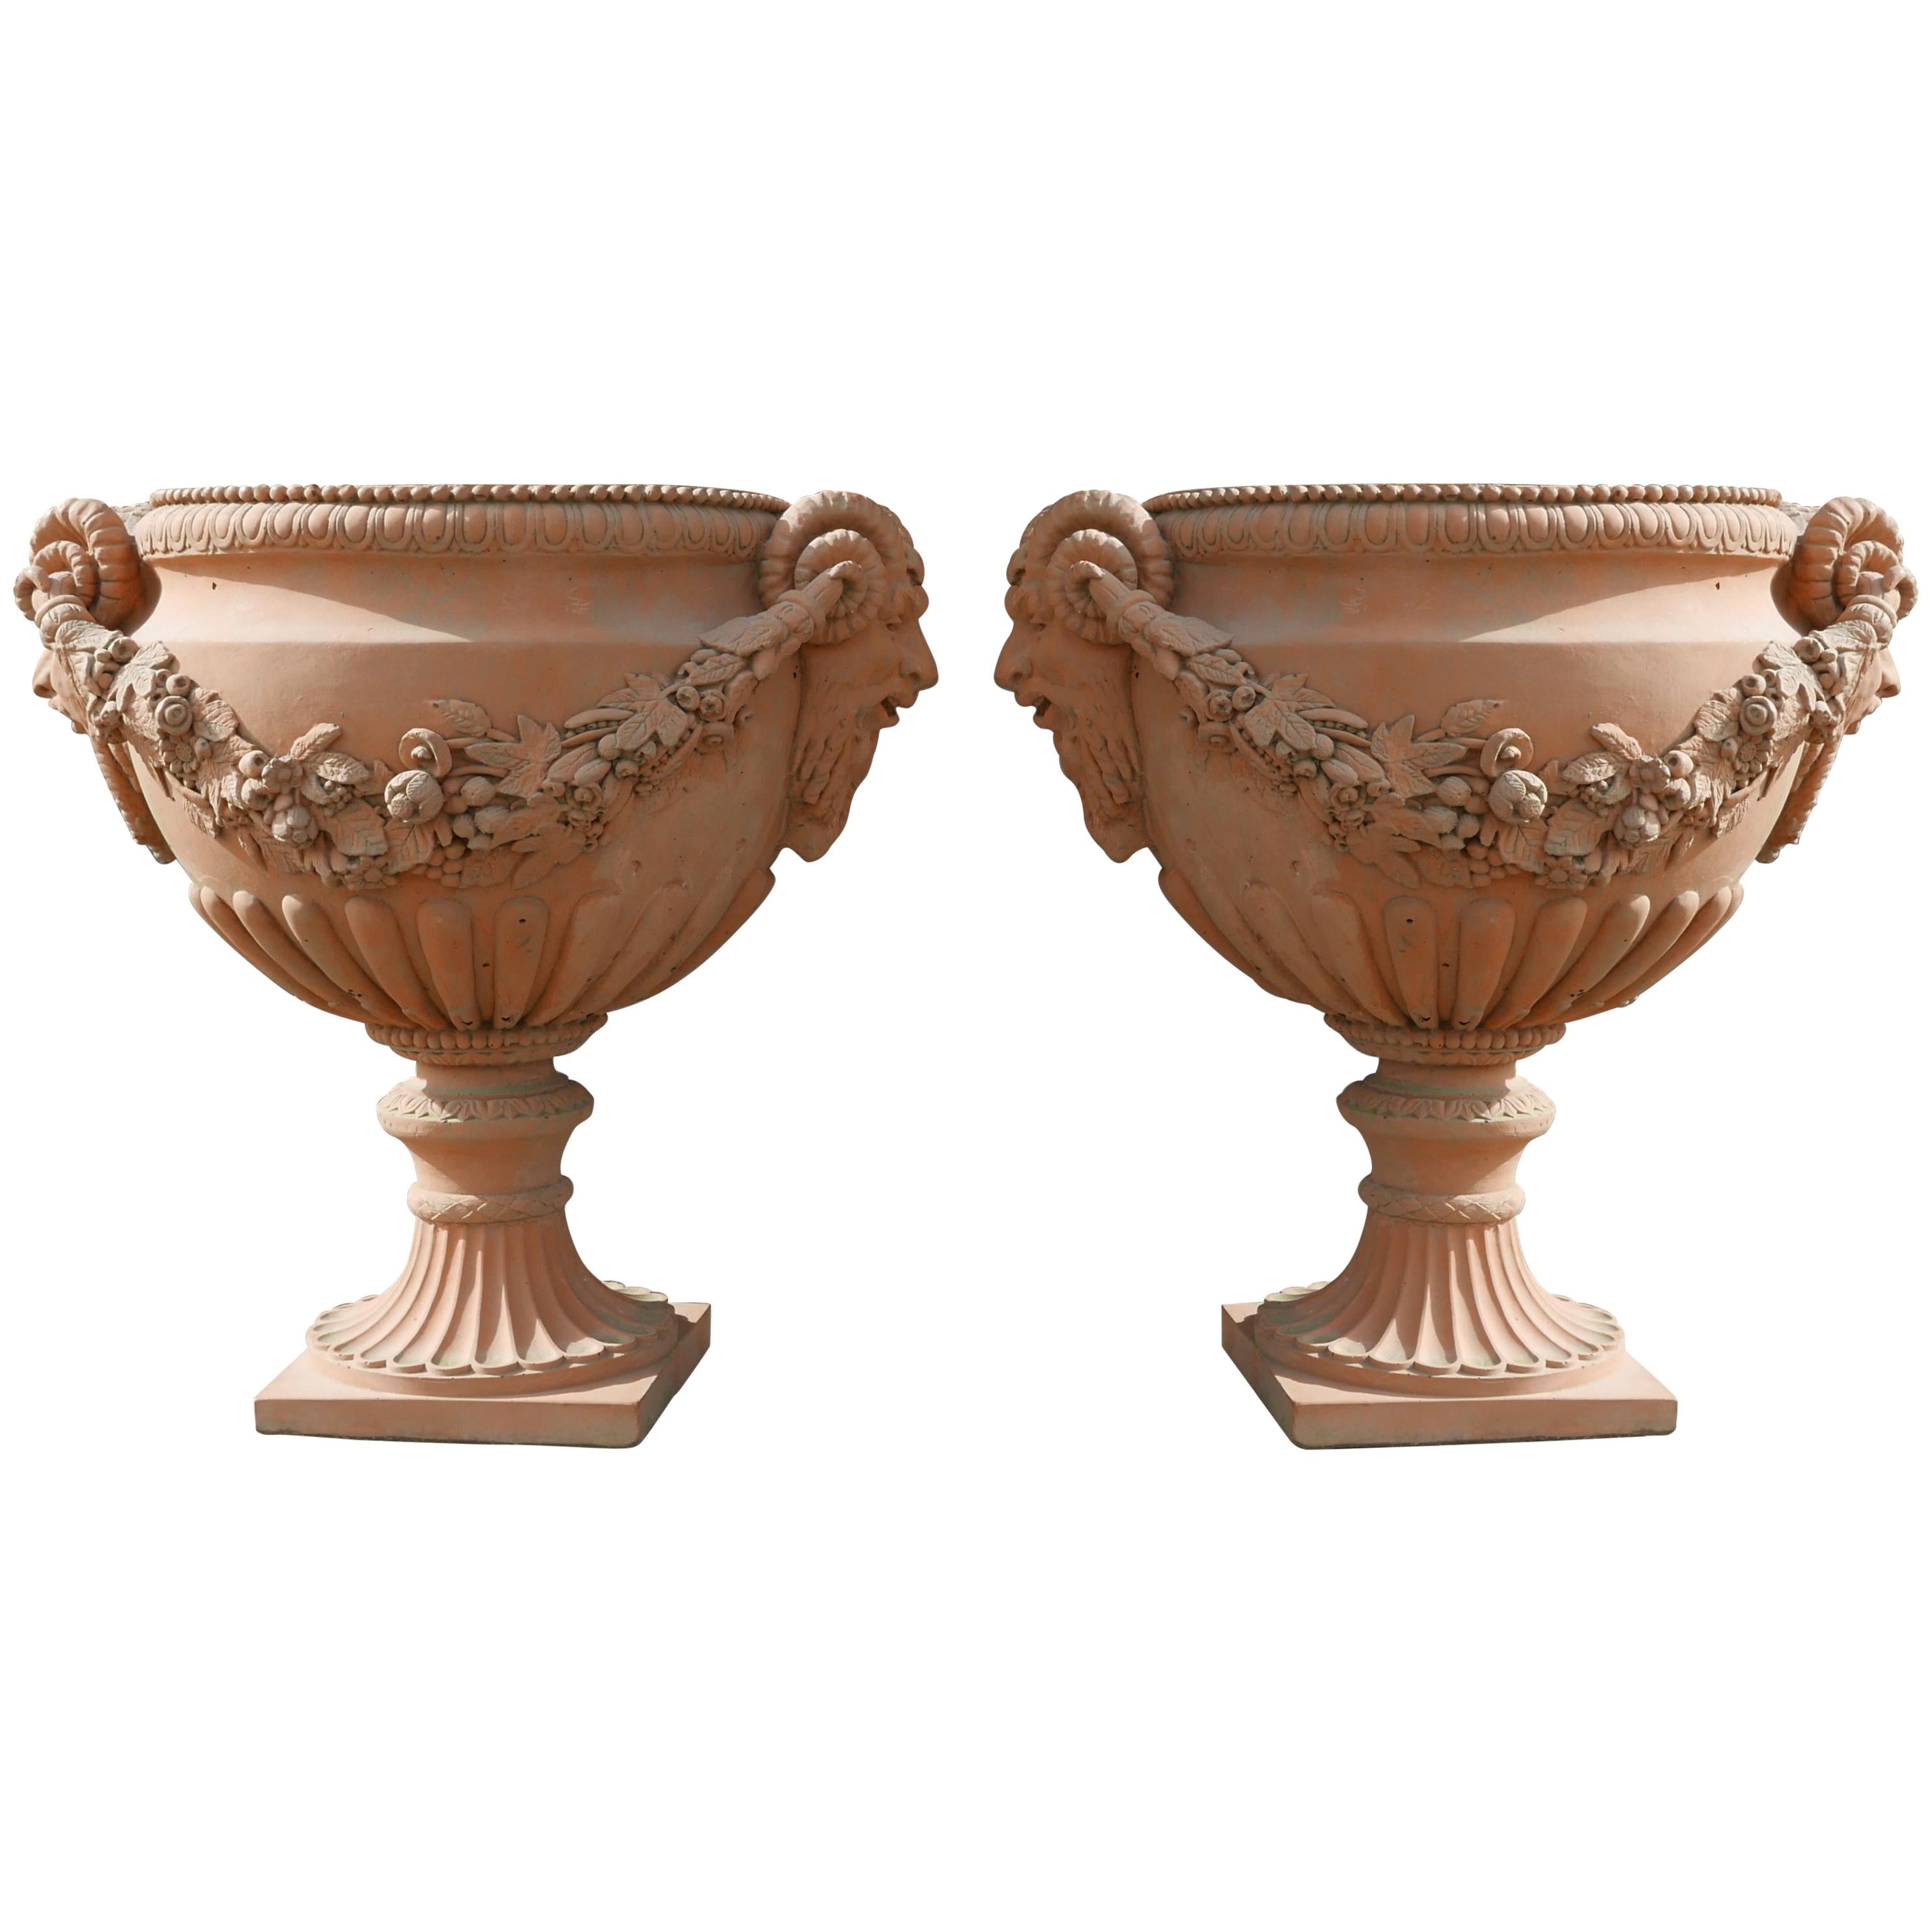 Pair of Italian Neoclassical Style Terracotta Planters